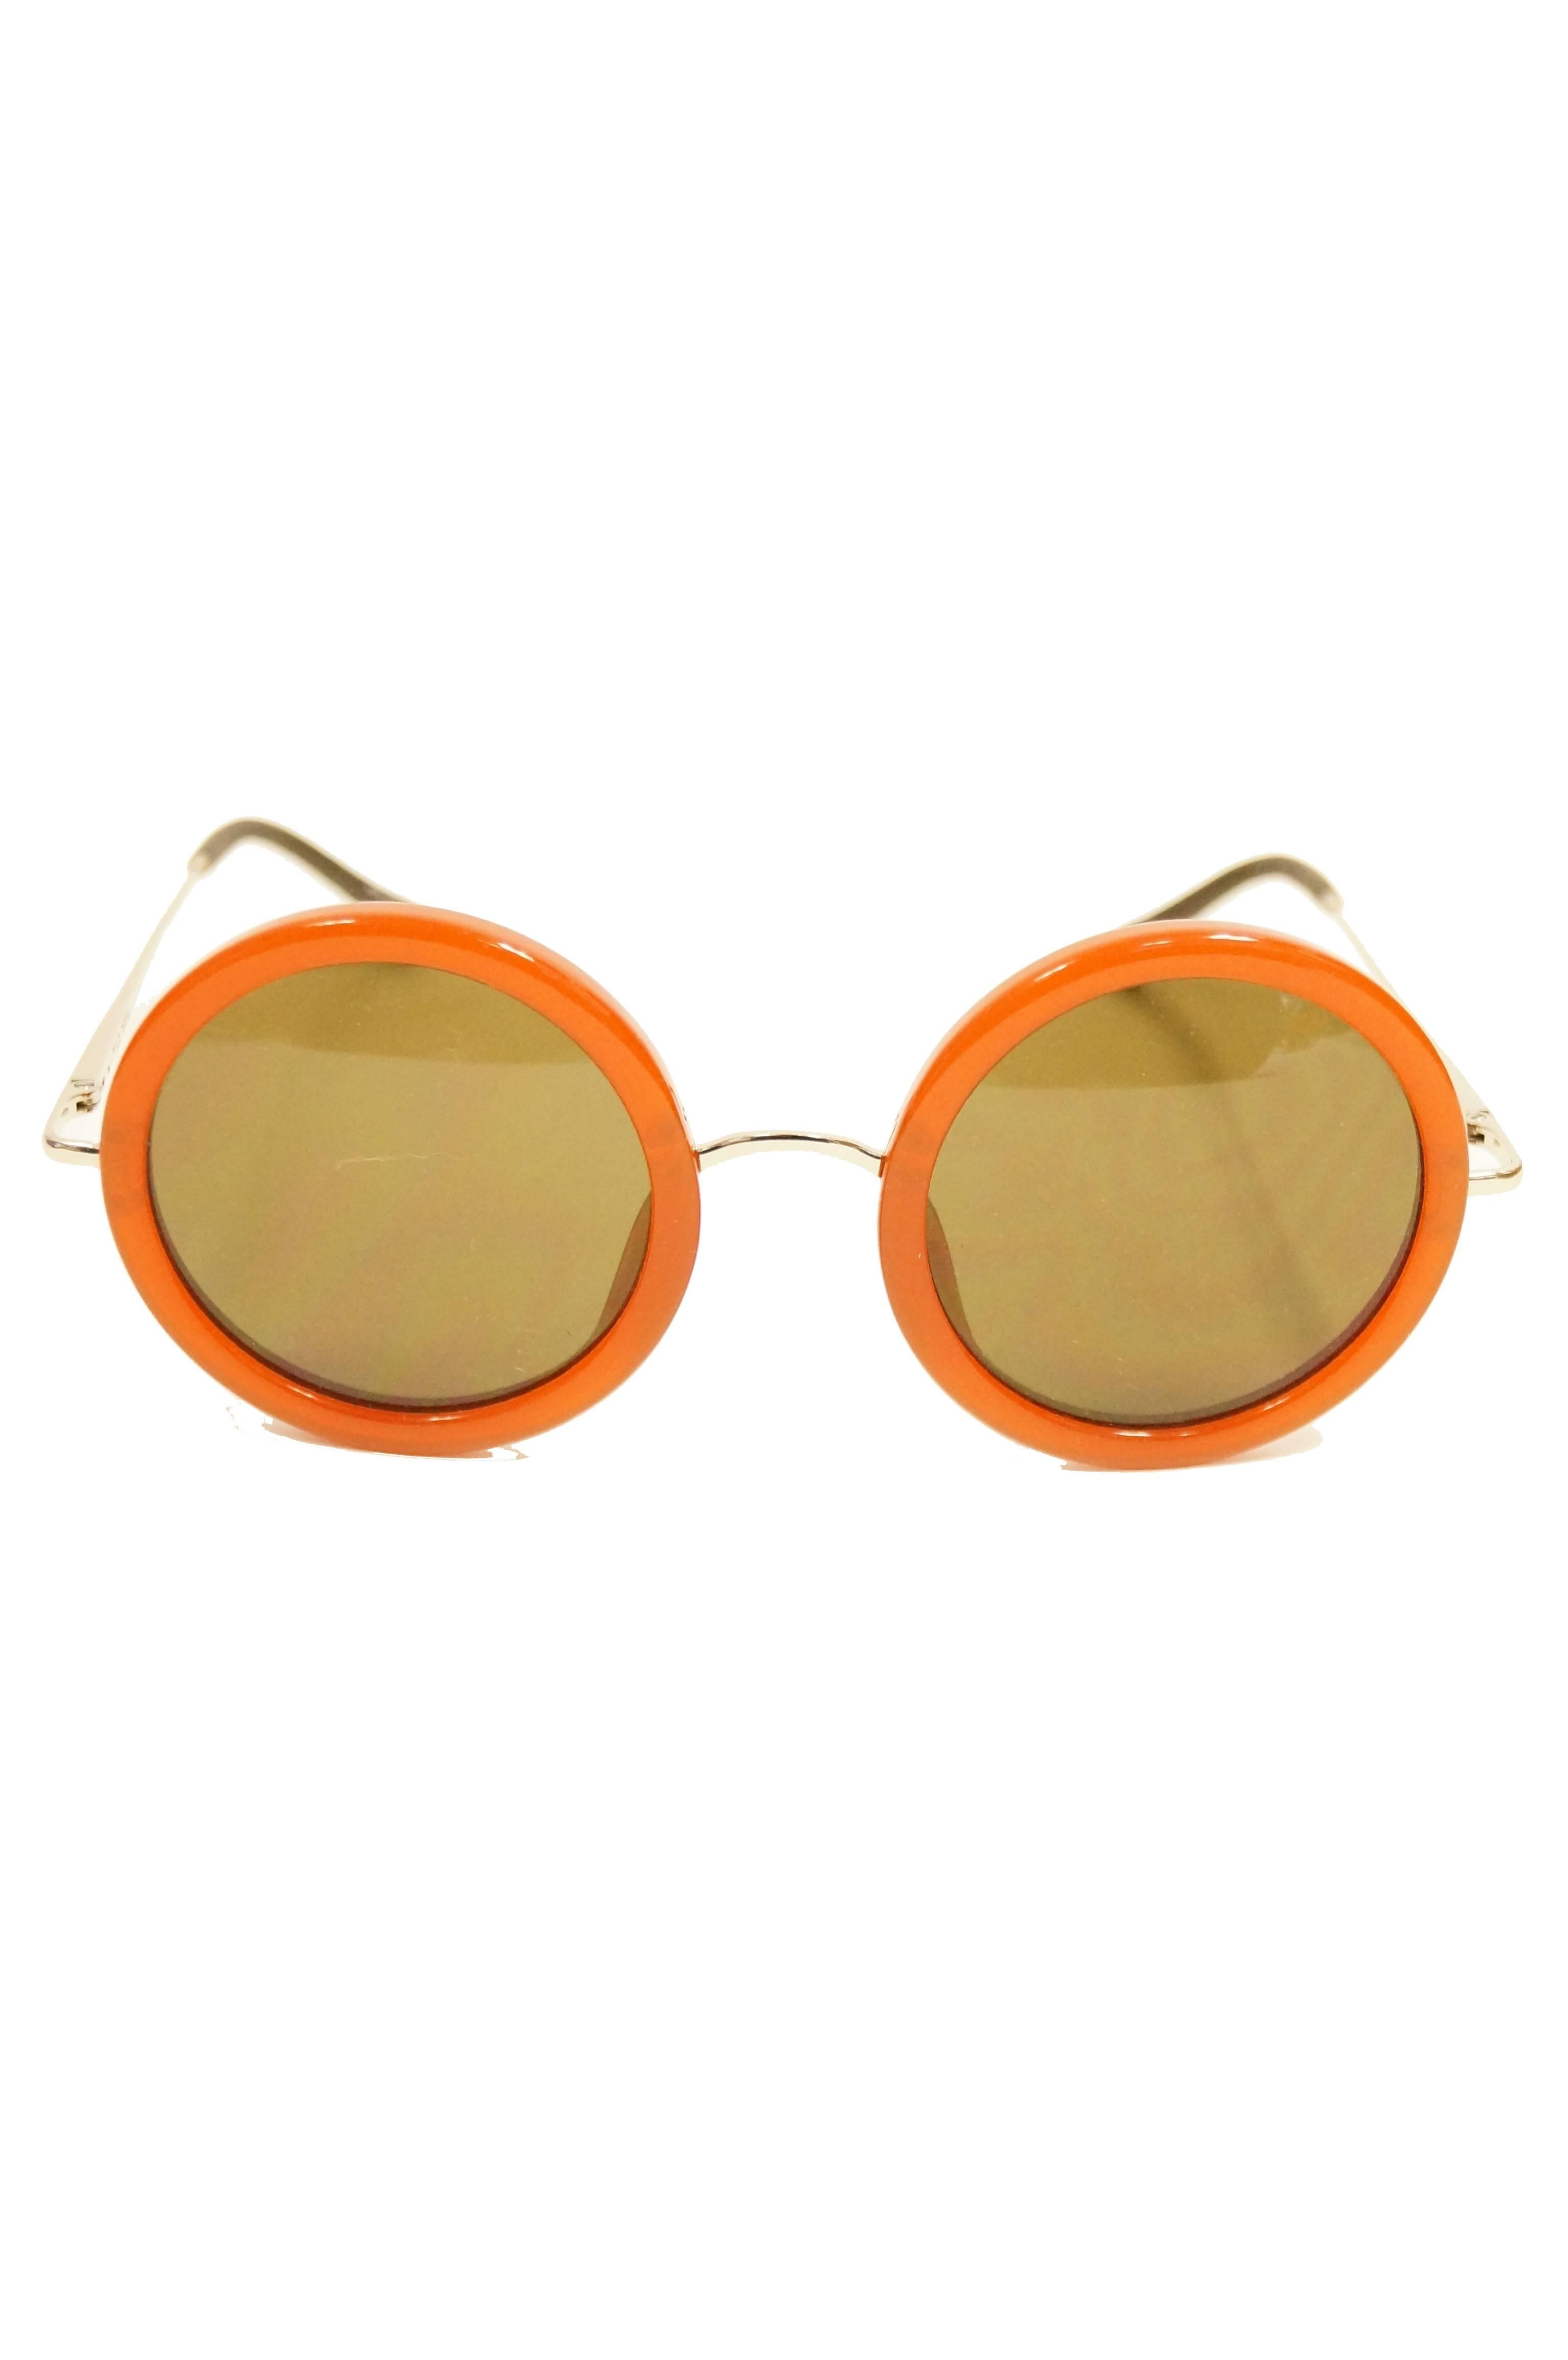 Contemporary amber frame Linda Farrow The Row round sunglasses. Sunglasses feature green quartz tint lenses, thin metal temples with black ends. Piece comes with case, box, and cleaning cloth. 

Lens width - 50 mm
Bridge Width -25 mm
Temple (Arm)